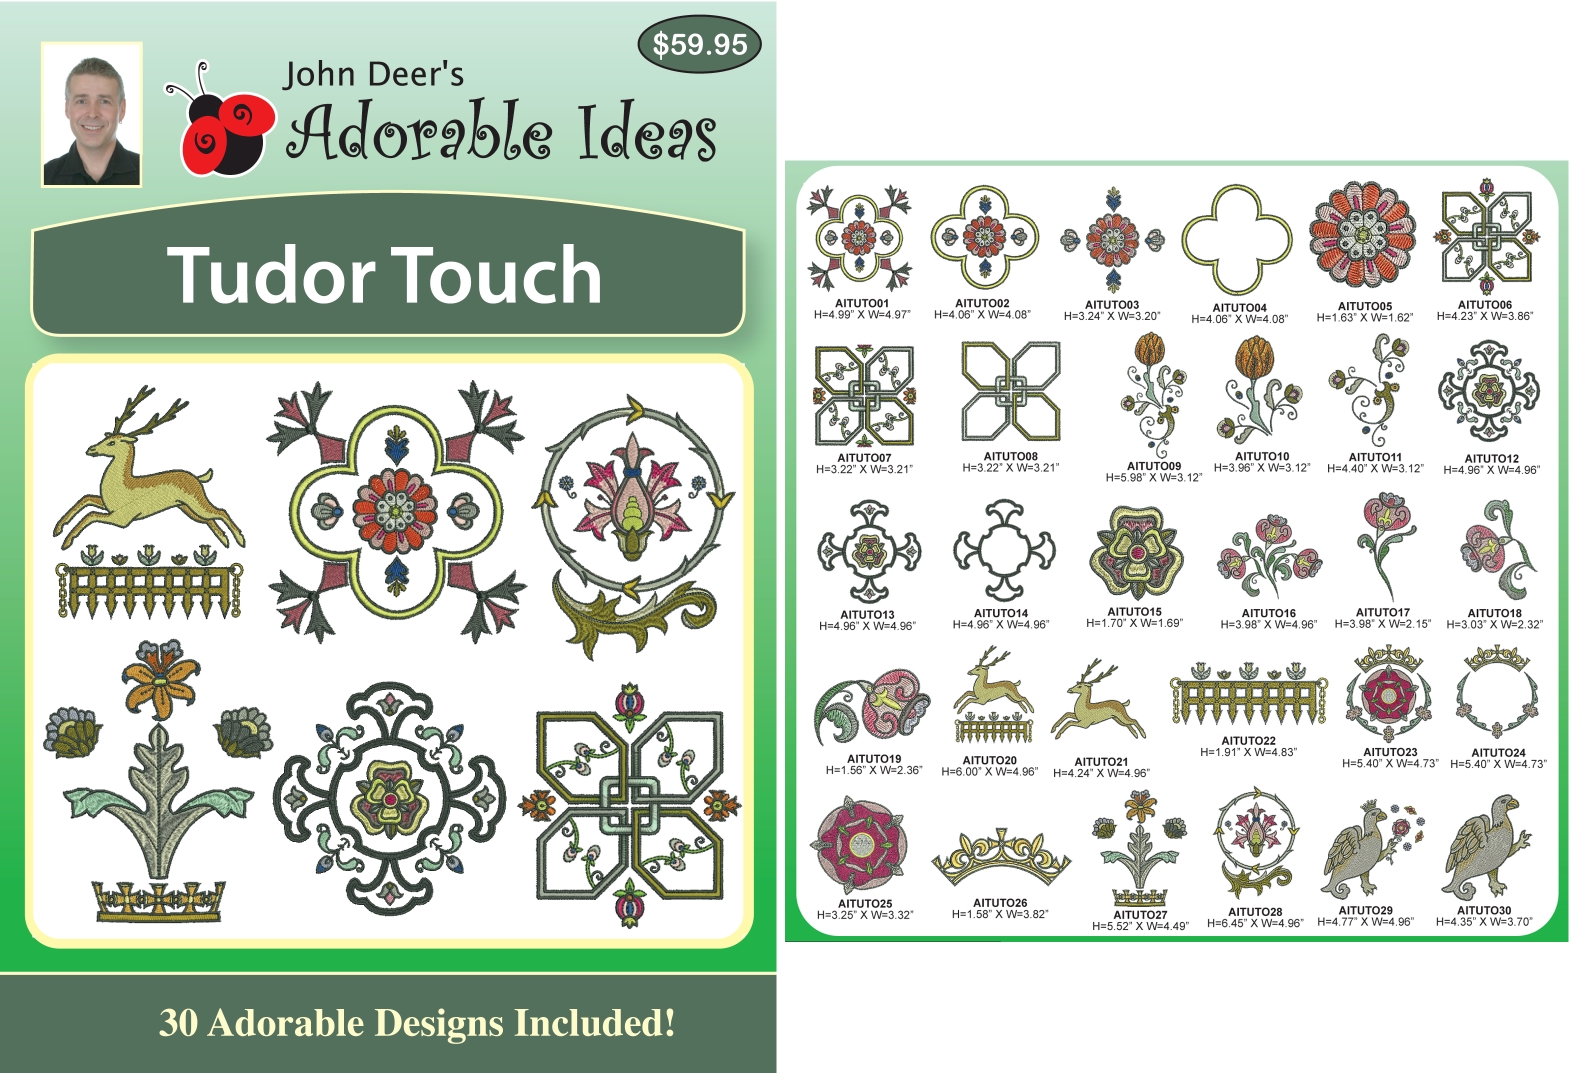 Tudor Touch Embroidery Designs by John Deer's Adorable Ideas - Multi-Format CD-ROM